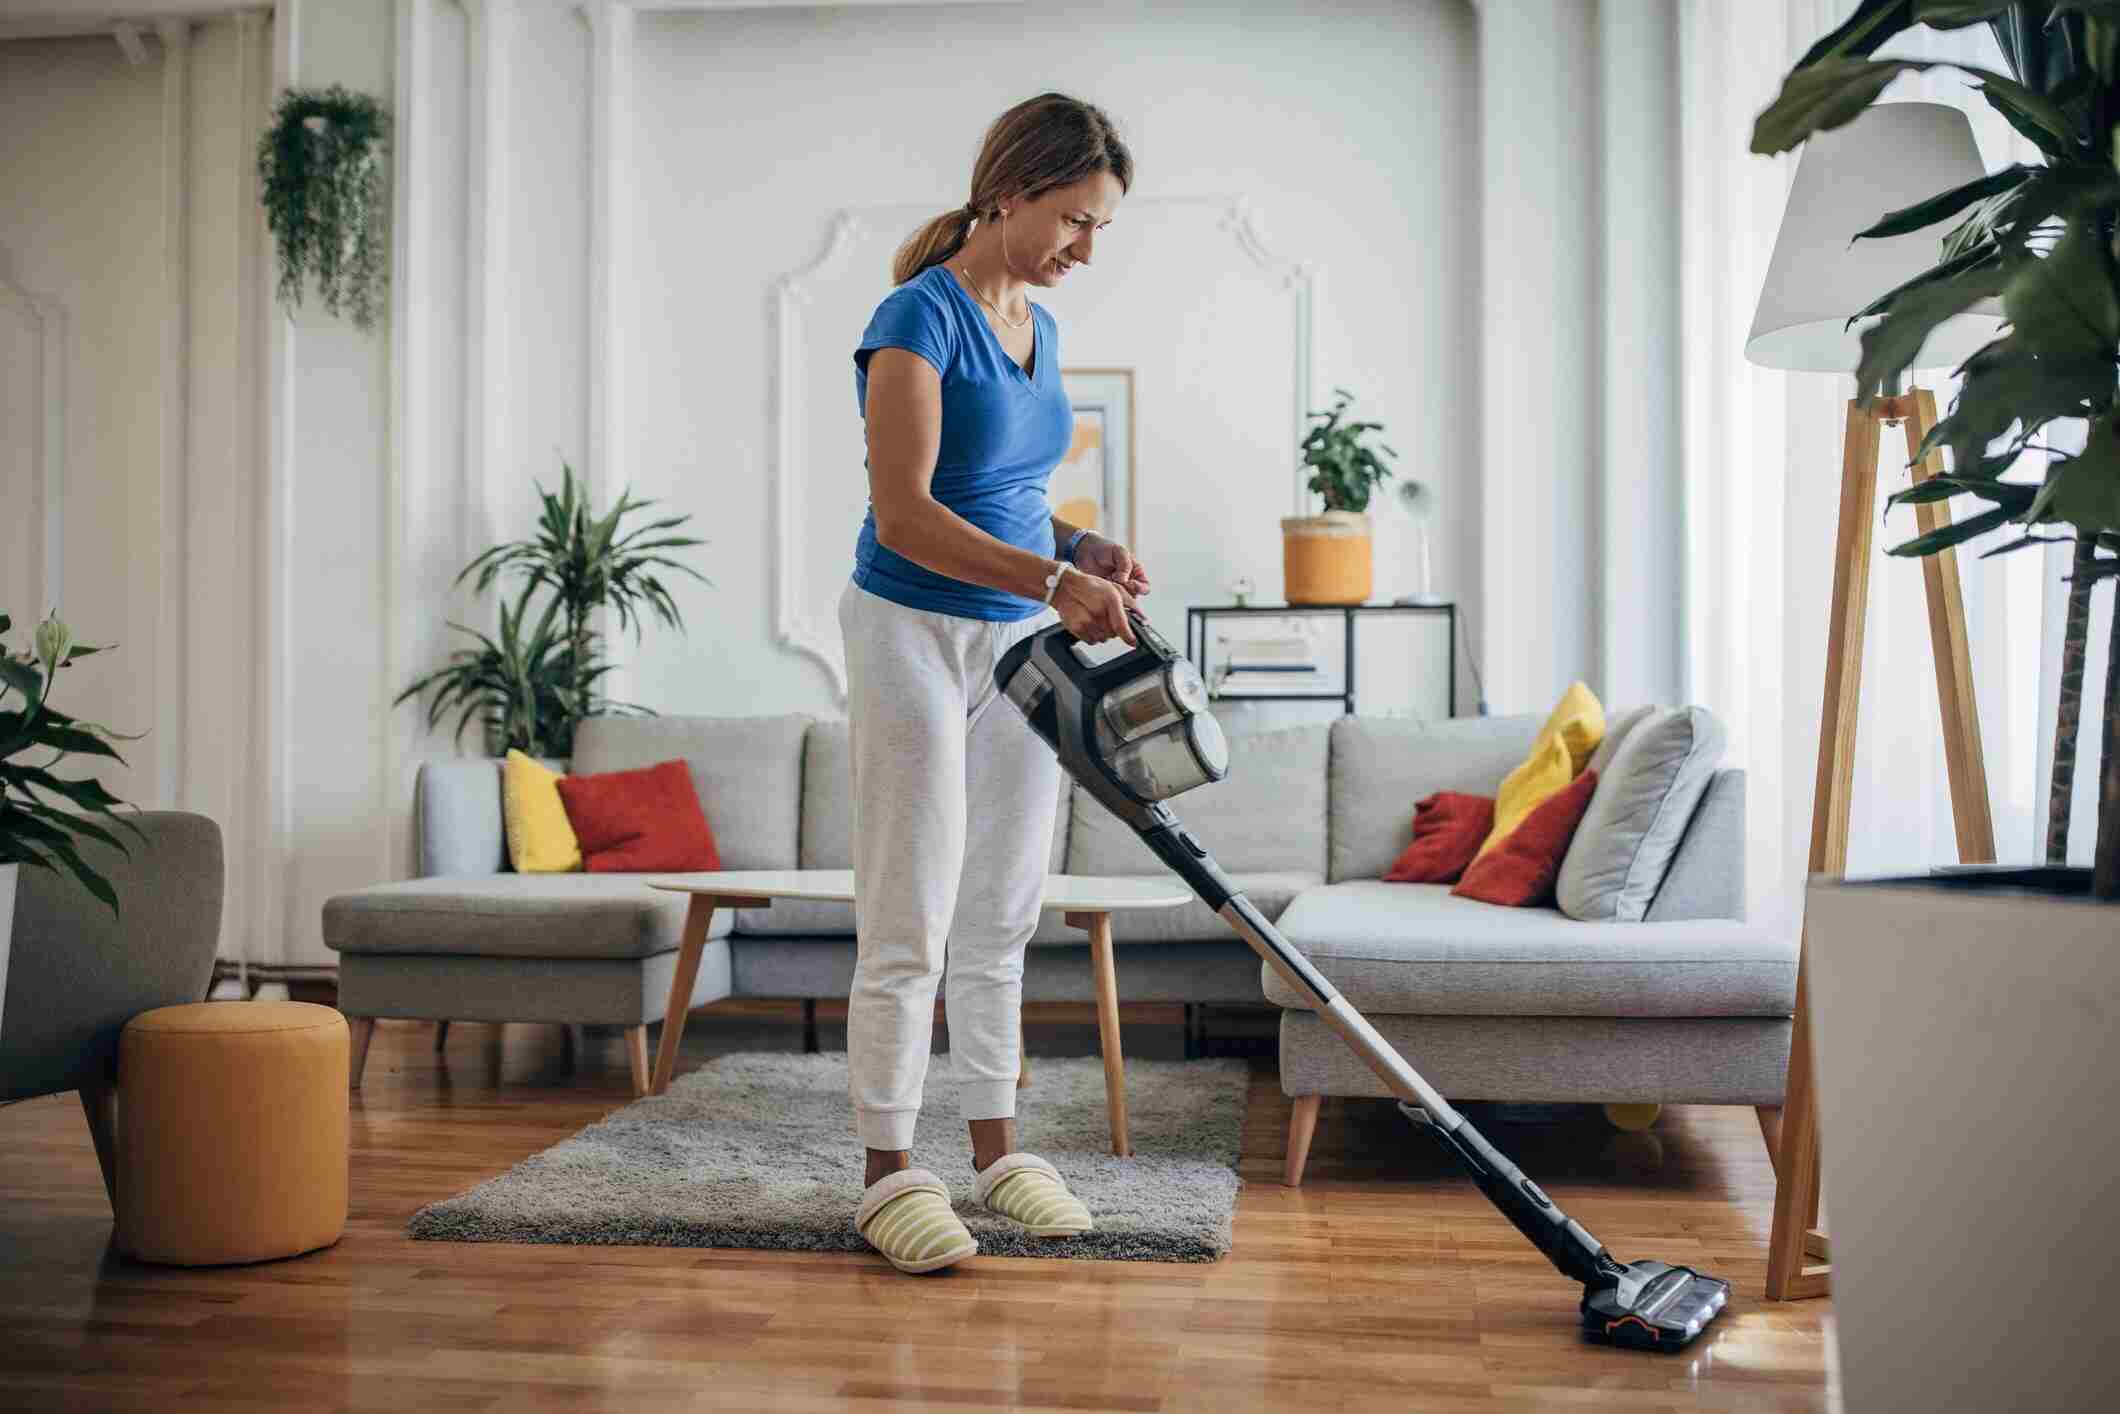 Can we Clean The House On Friday According To Astrology And Vastu Shastra?